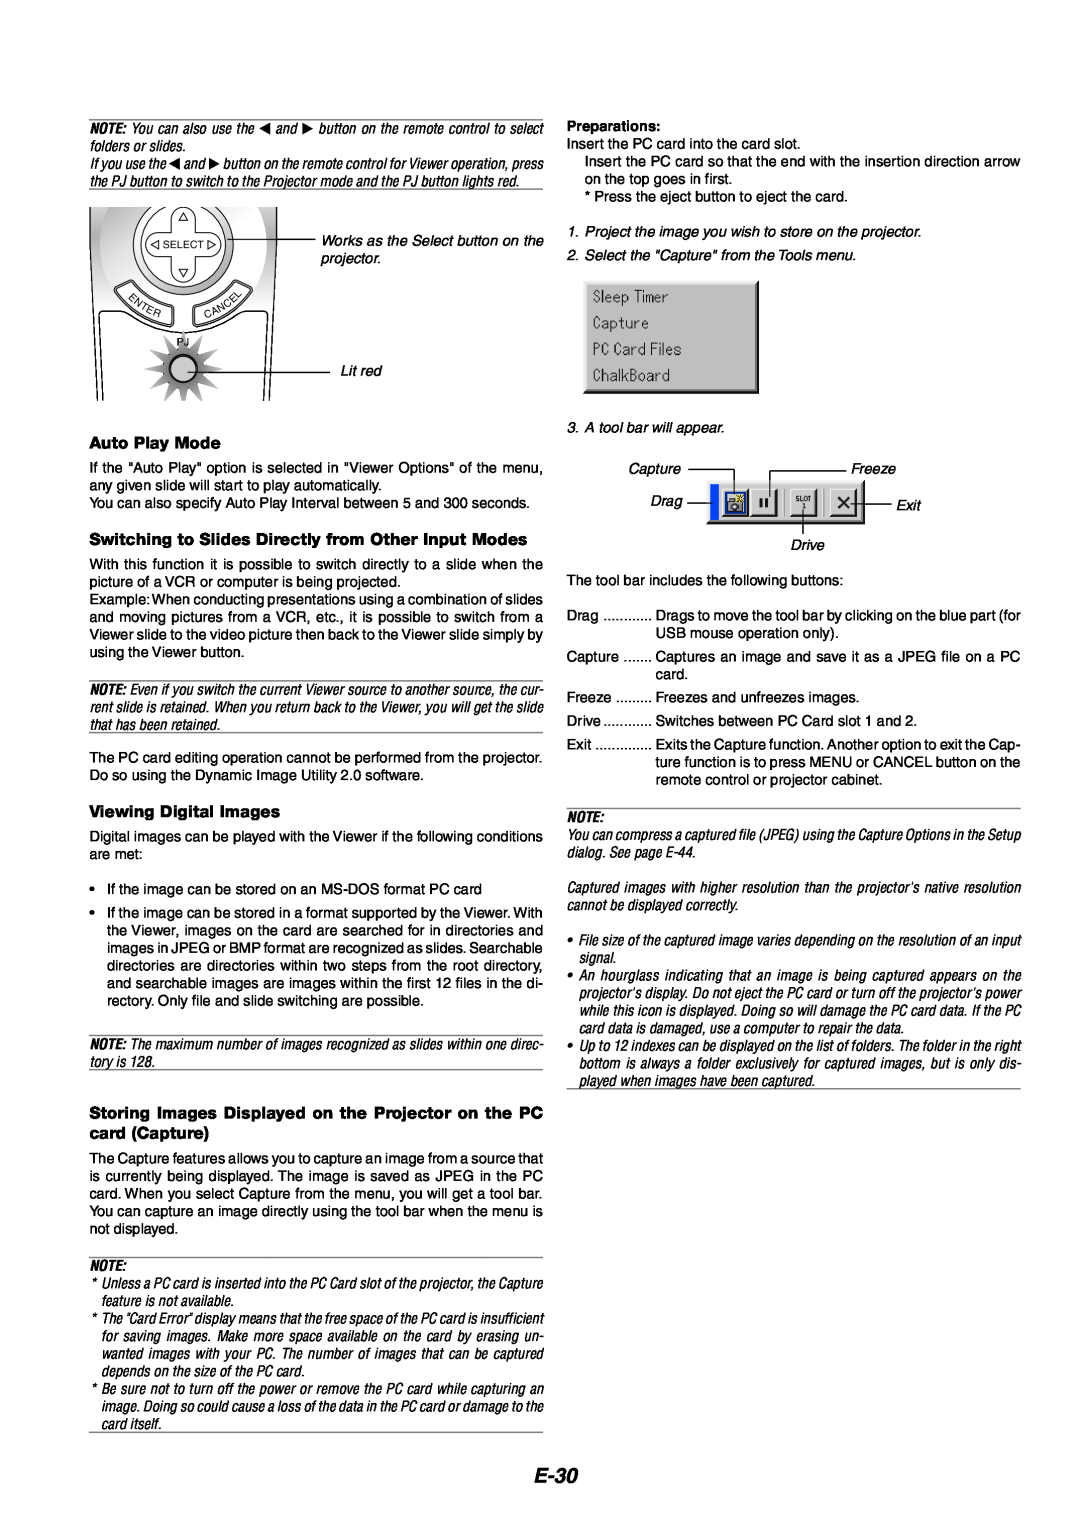 NEC MT1060 user manual E-30, Auto Play Mode, Viewing Digital Images 